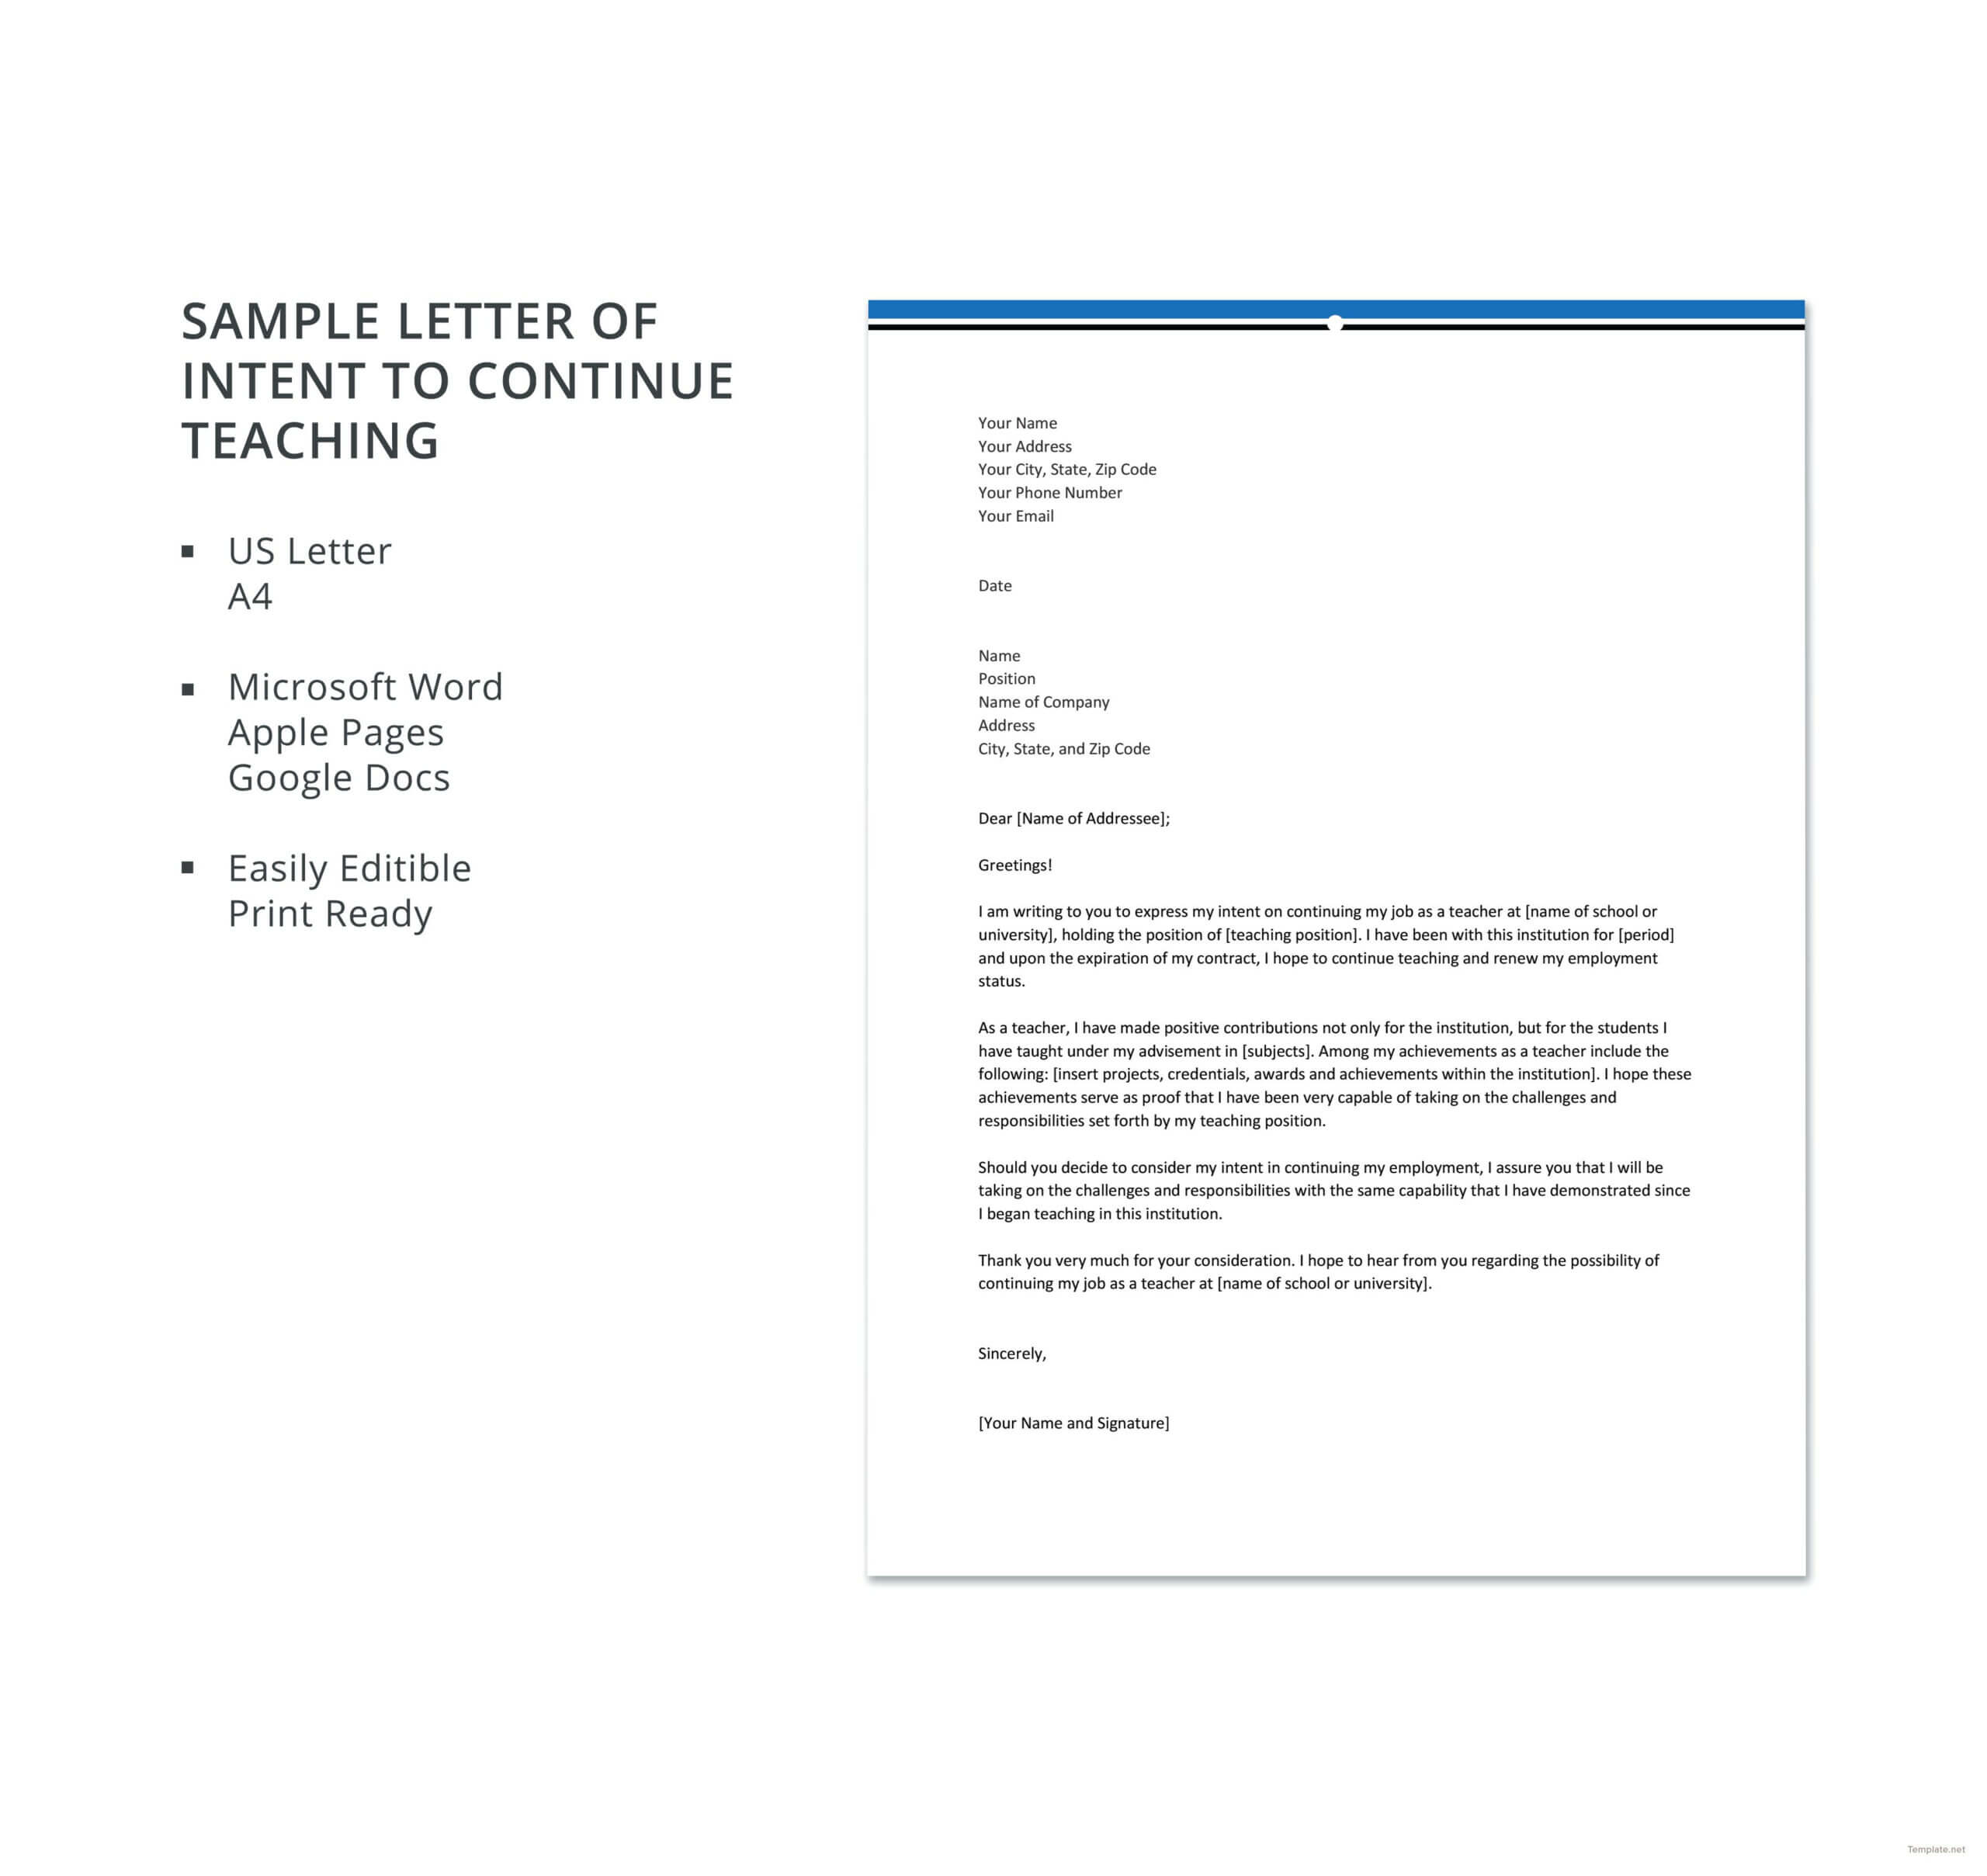 Free Sample Letter Of Intent To Continue Teaching | Job Pertaining To Letter Of Interest Template Microsoft Word